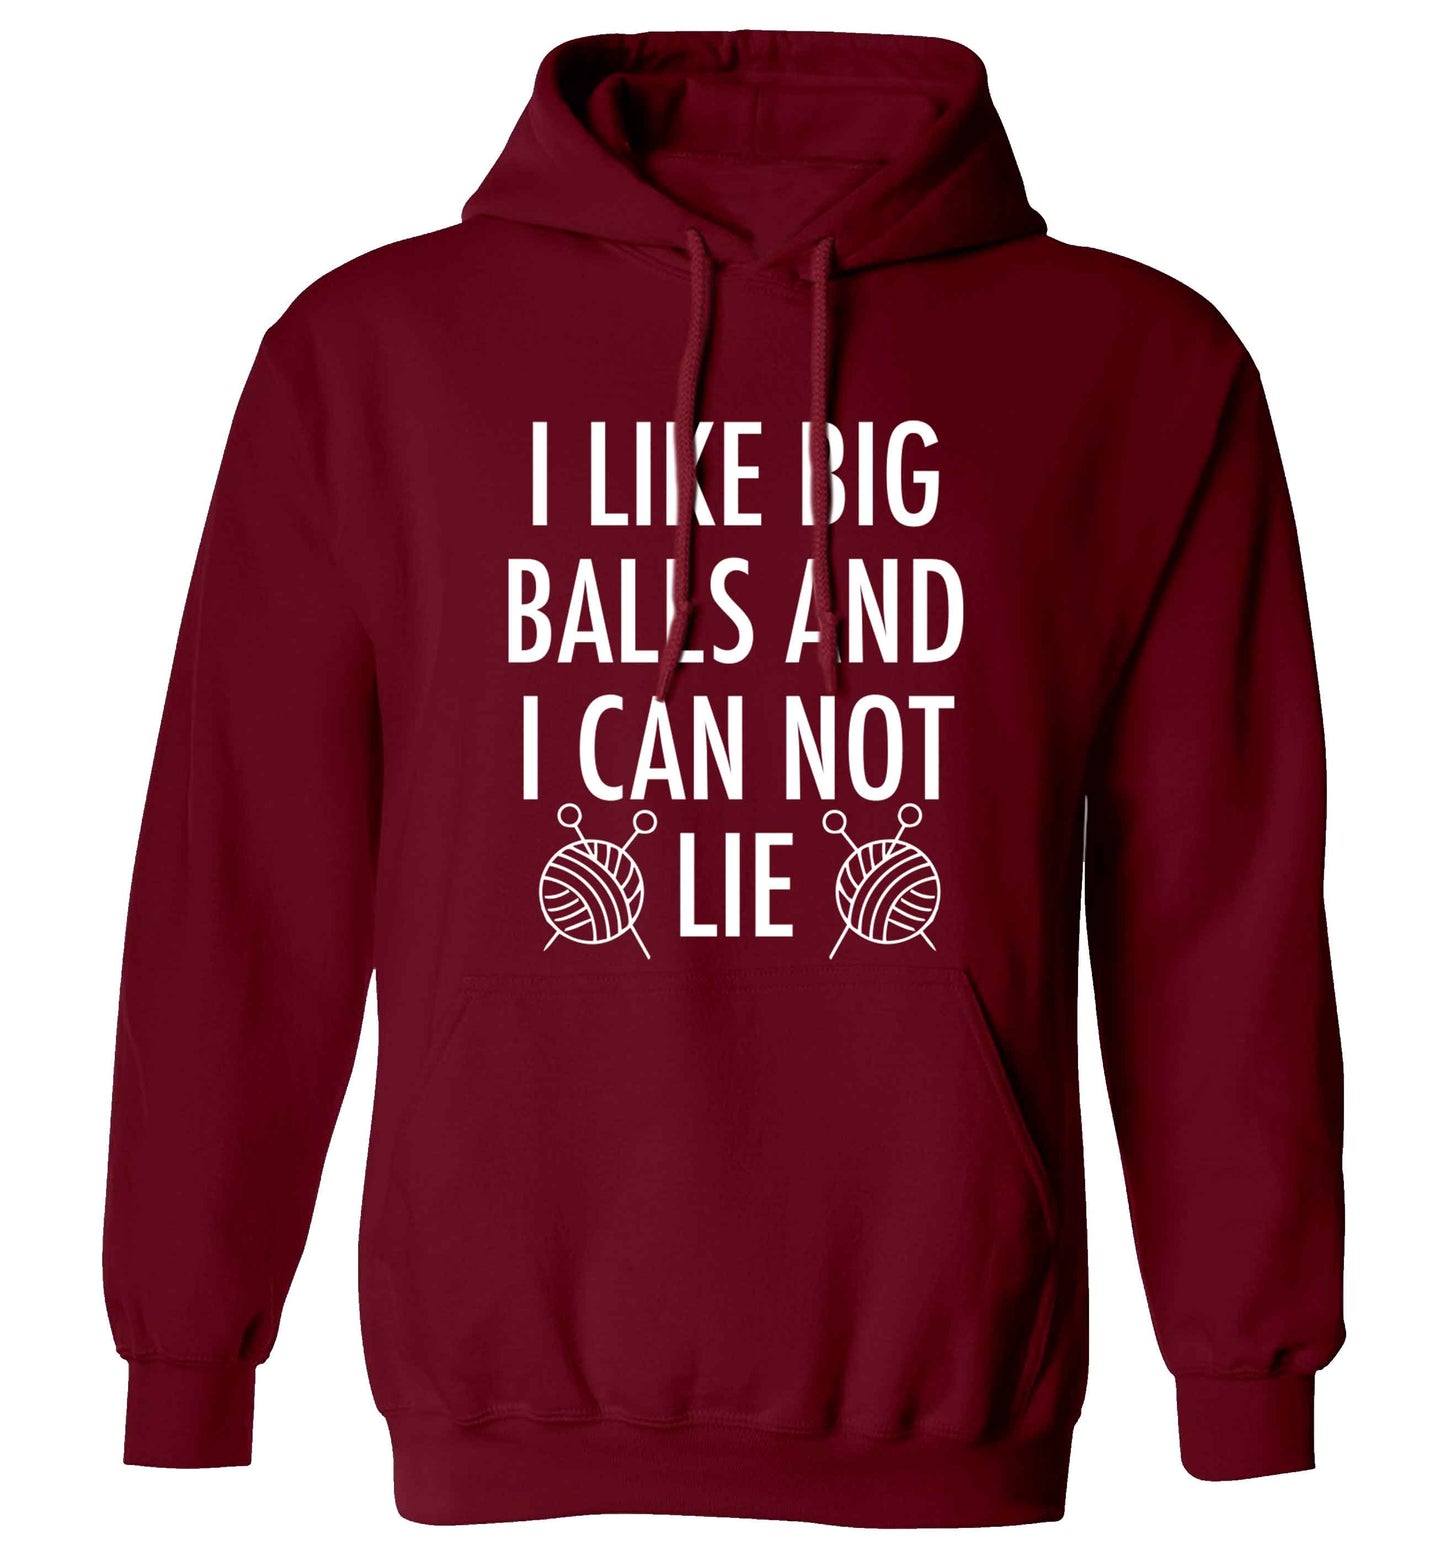 I like big balls and I can not lie adults unisex maroon hoodie 2XL